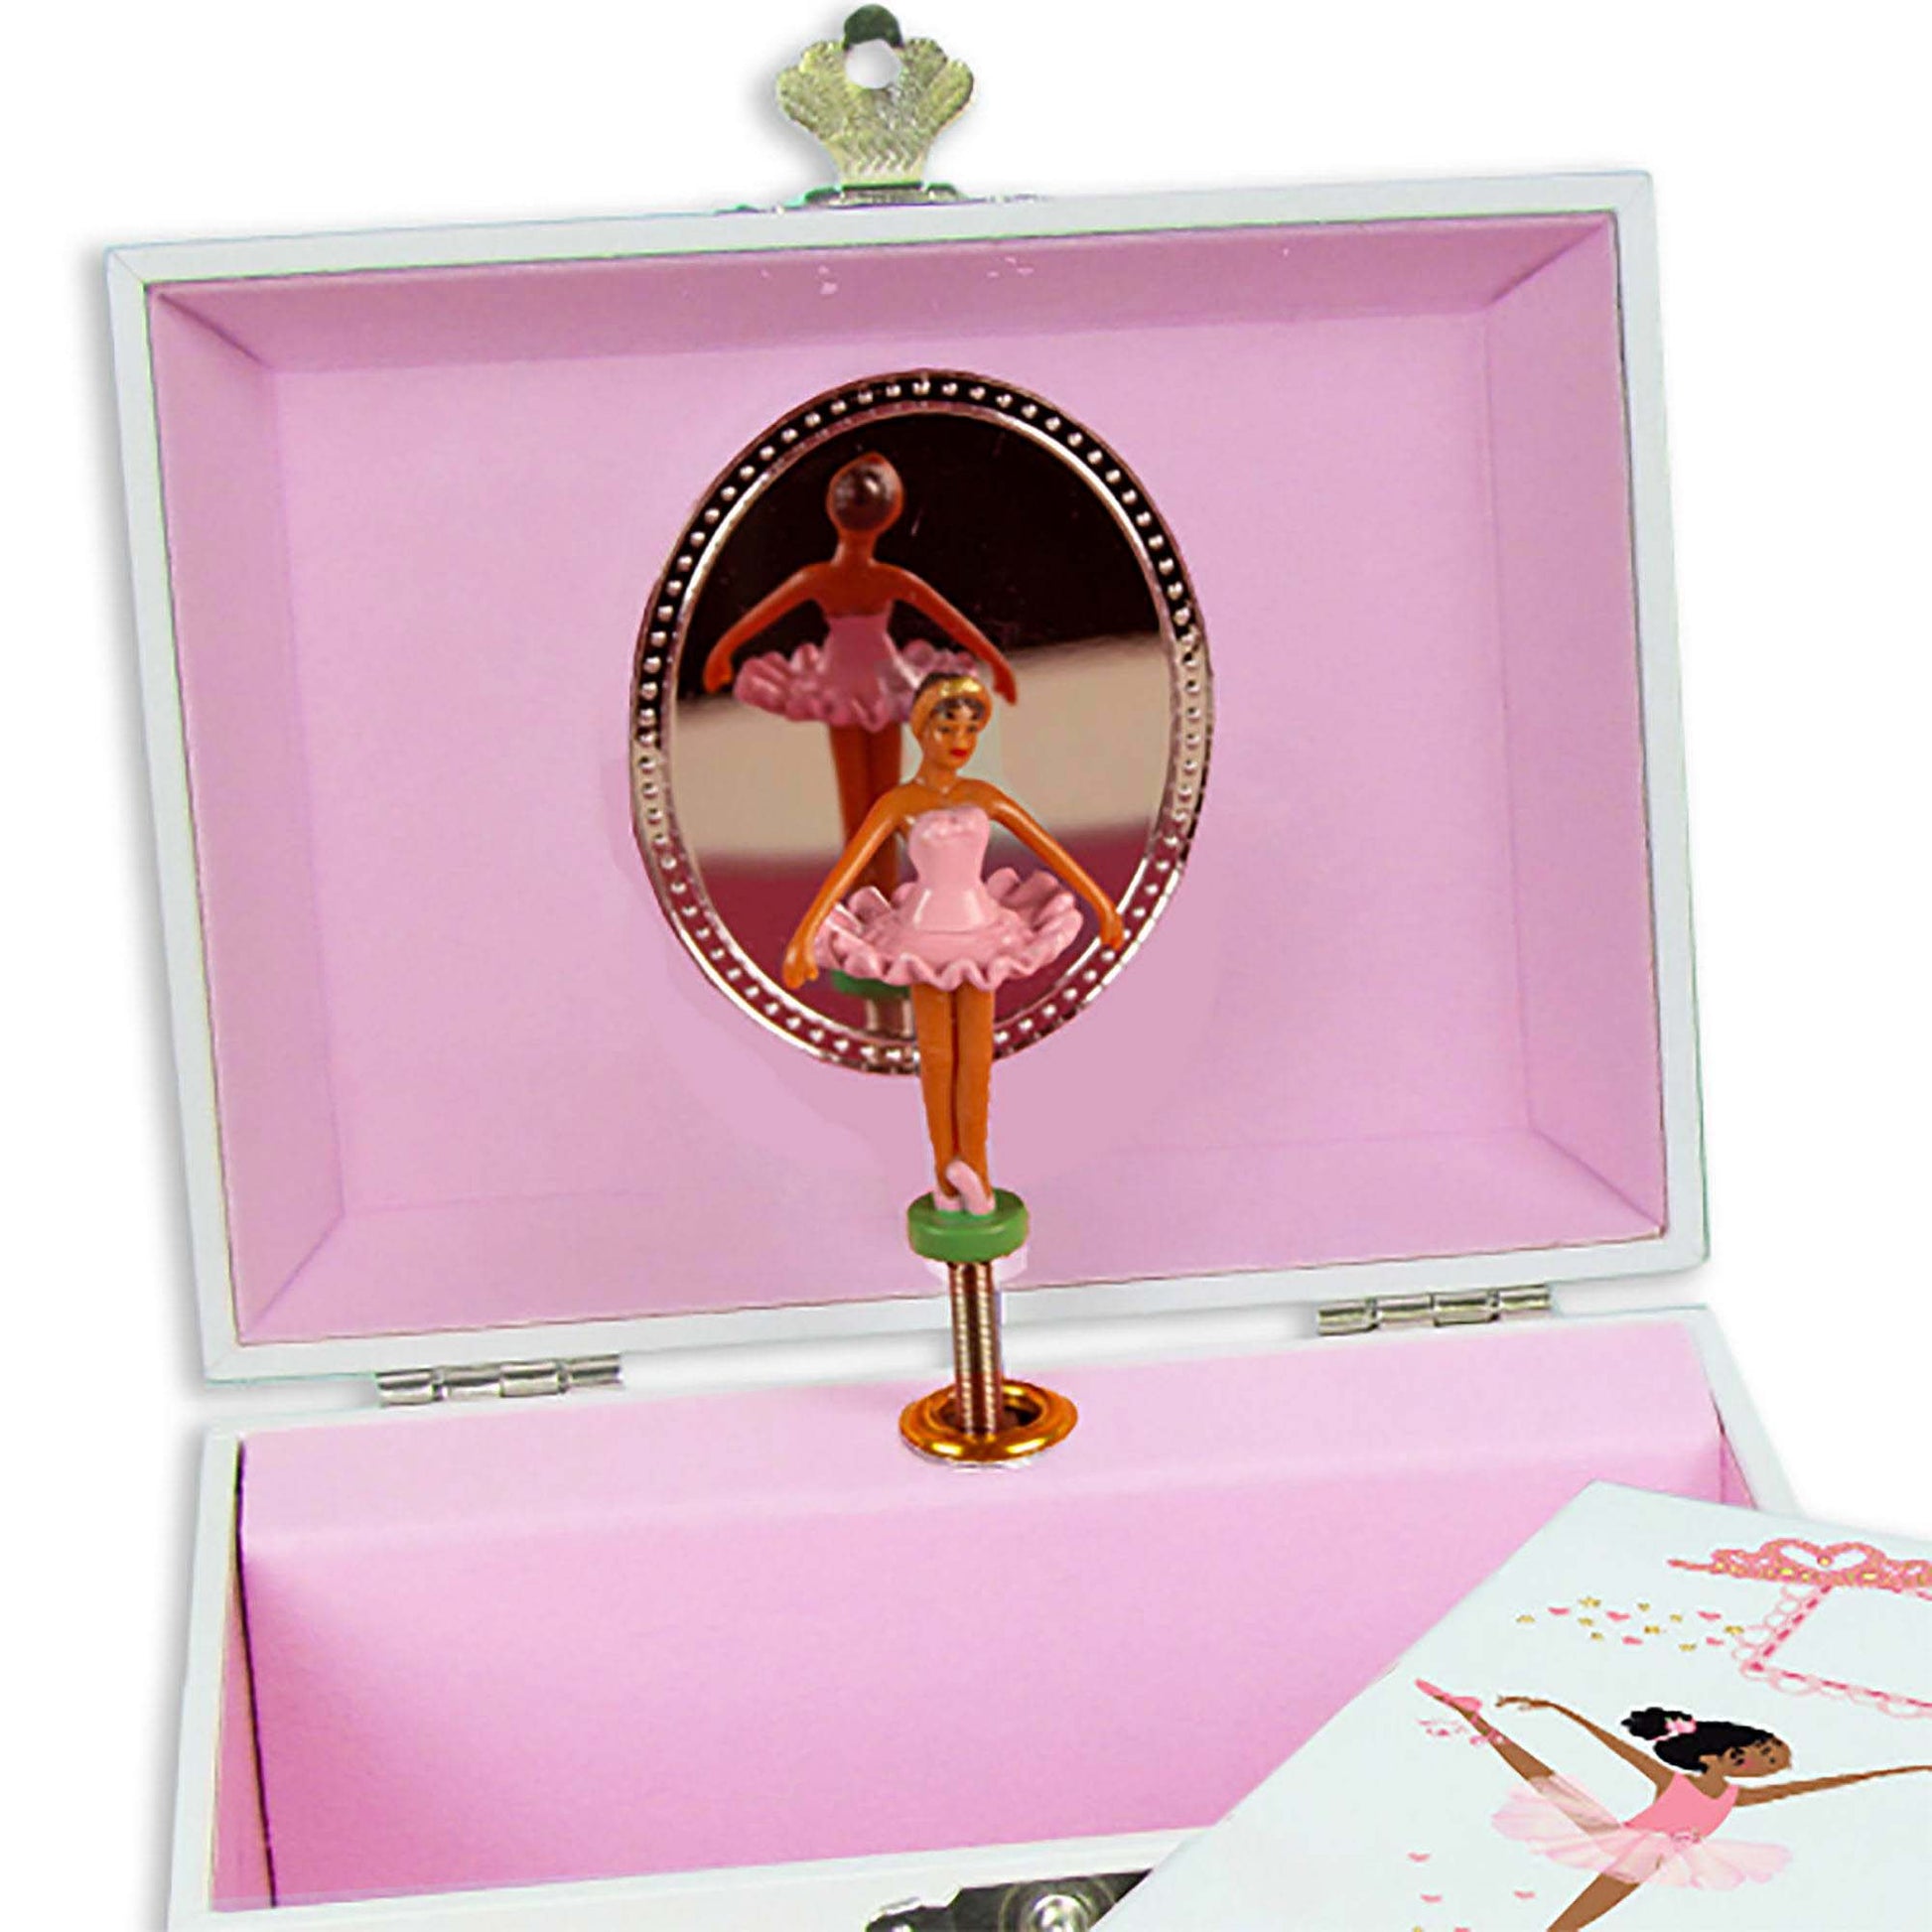 Personalized Ballerina Jewelry Box with Ballet Princess design